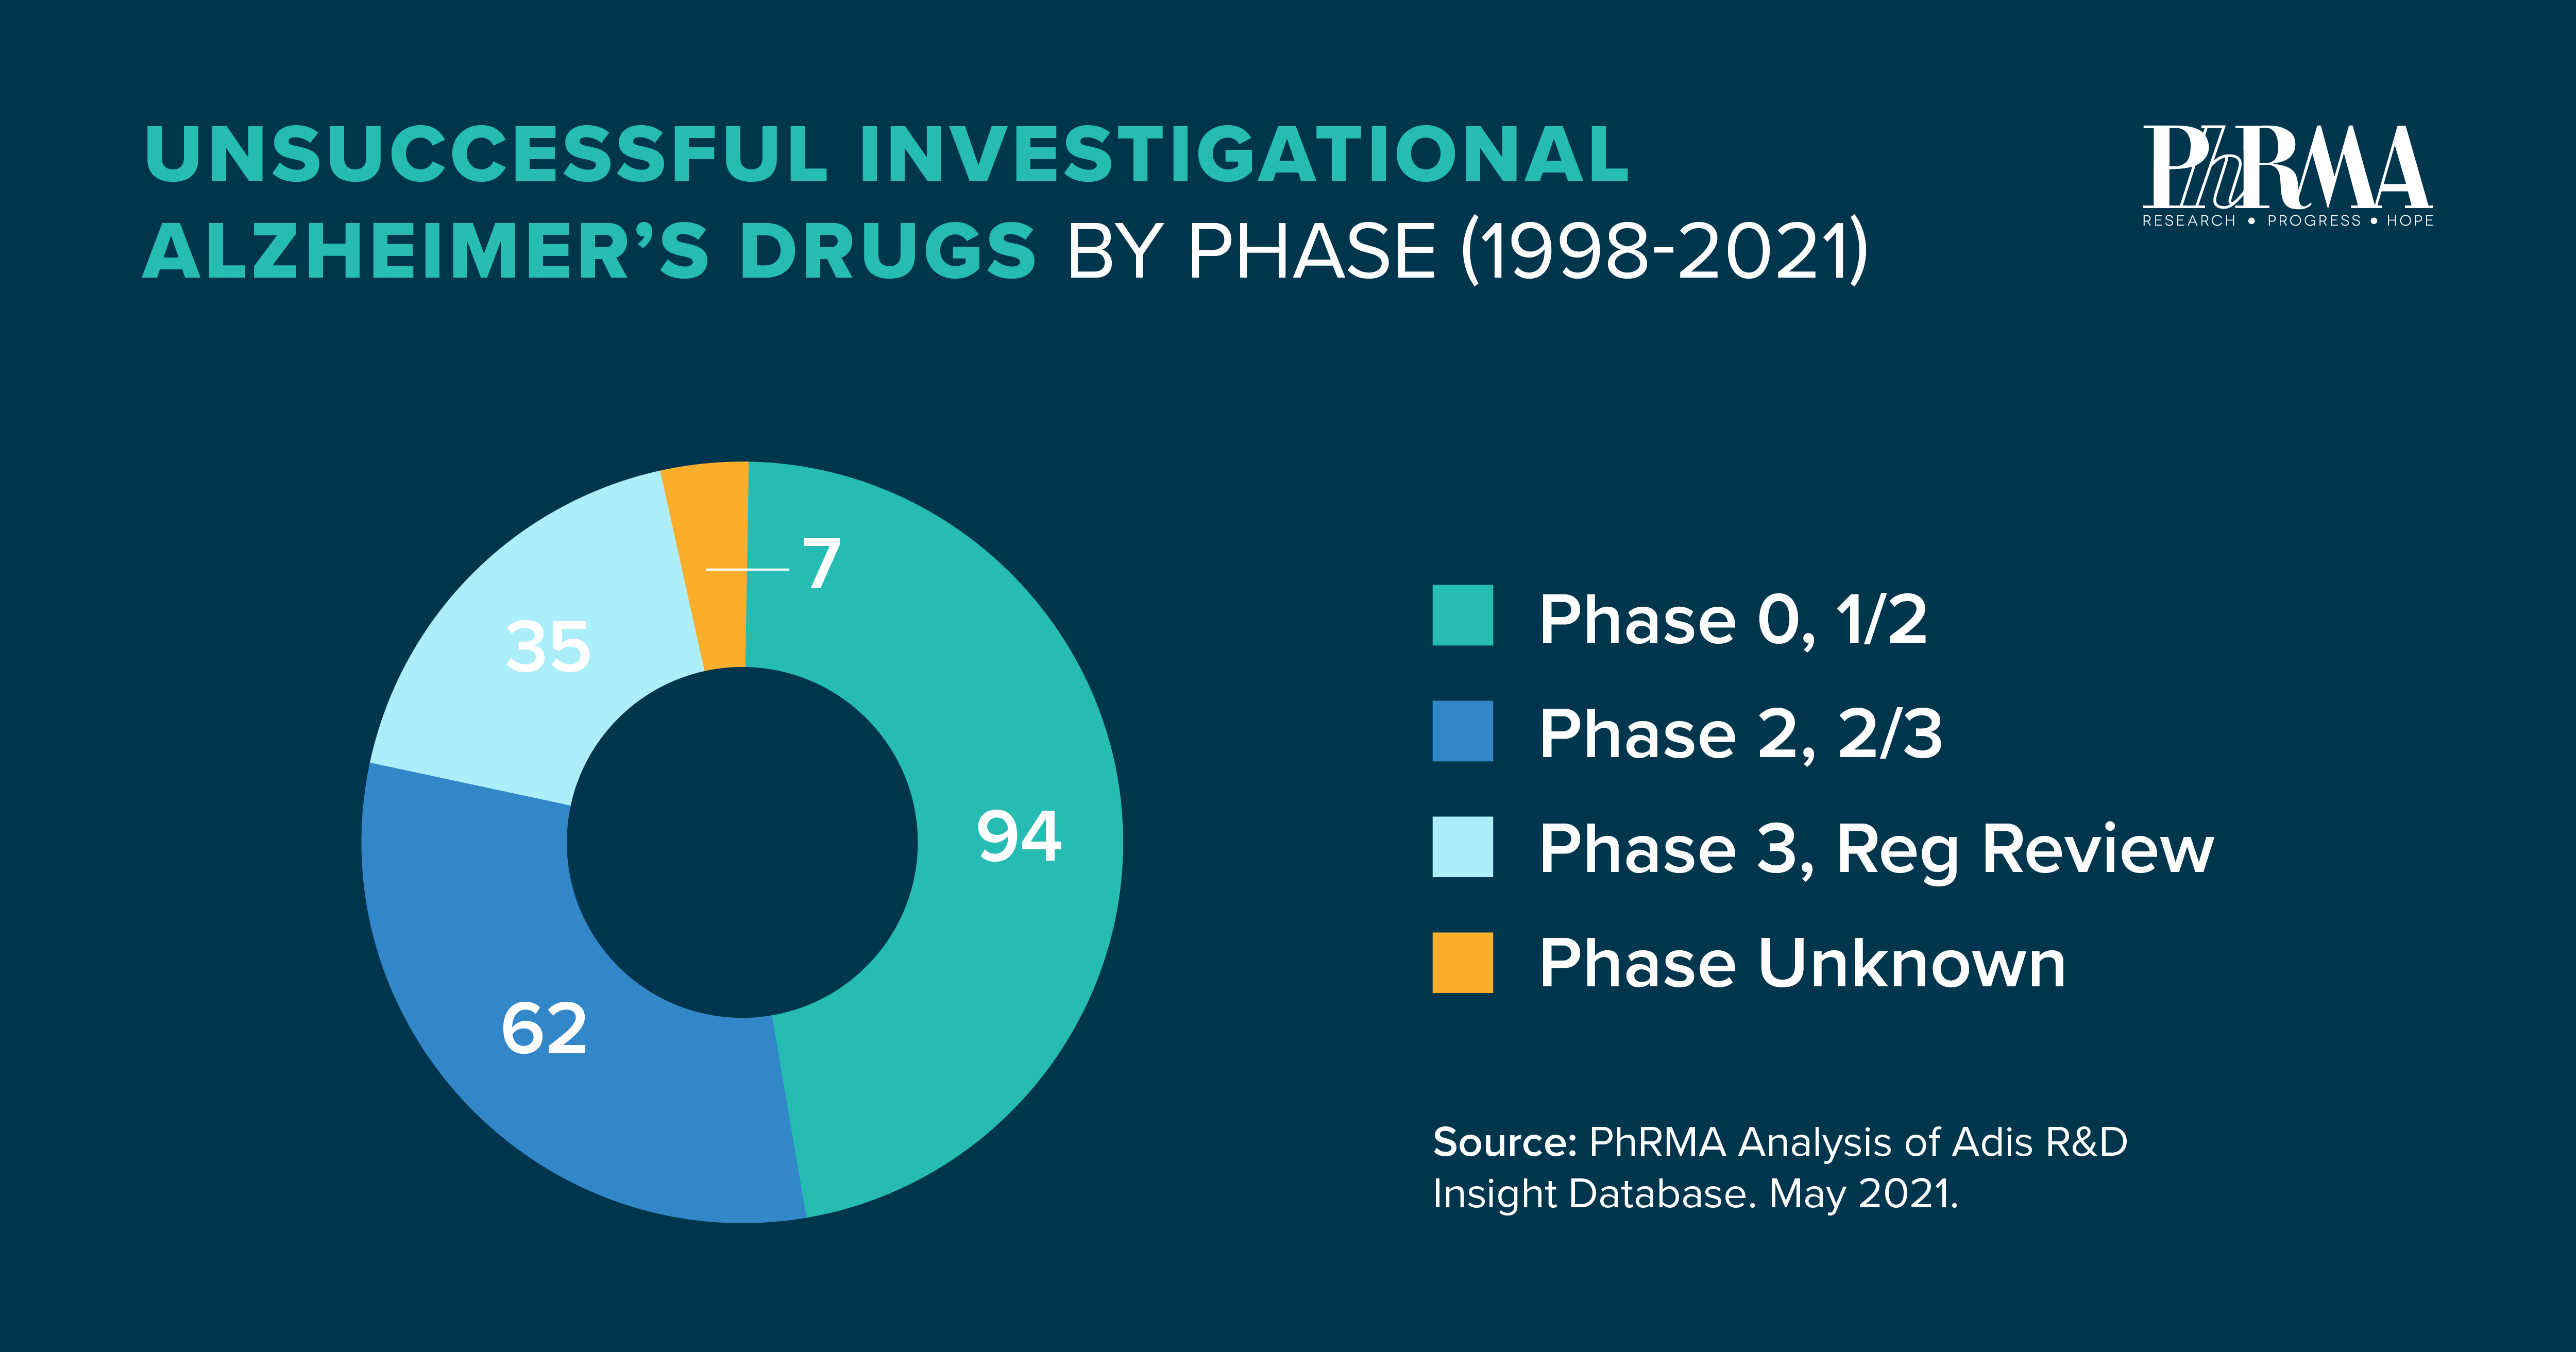 An infographic displaying the percentage of unsuccessful investigational Alzheimer's drugs by phase